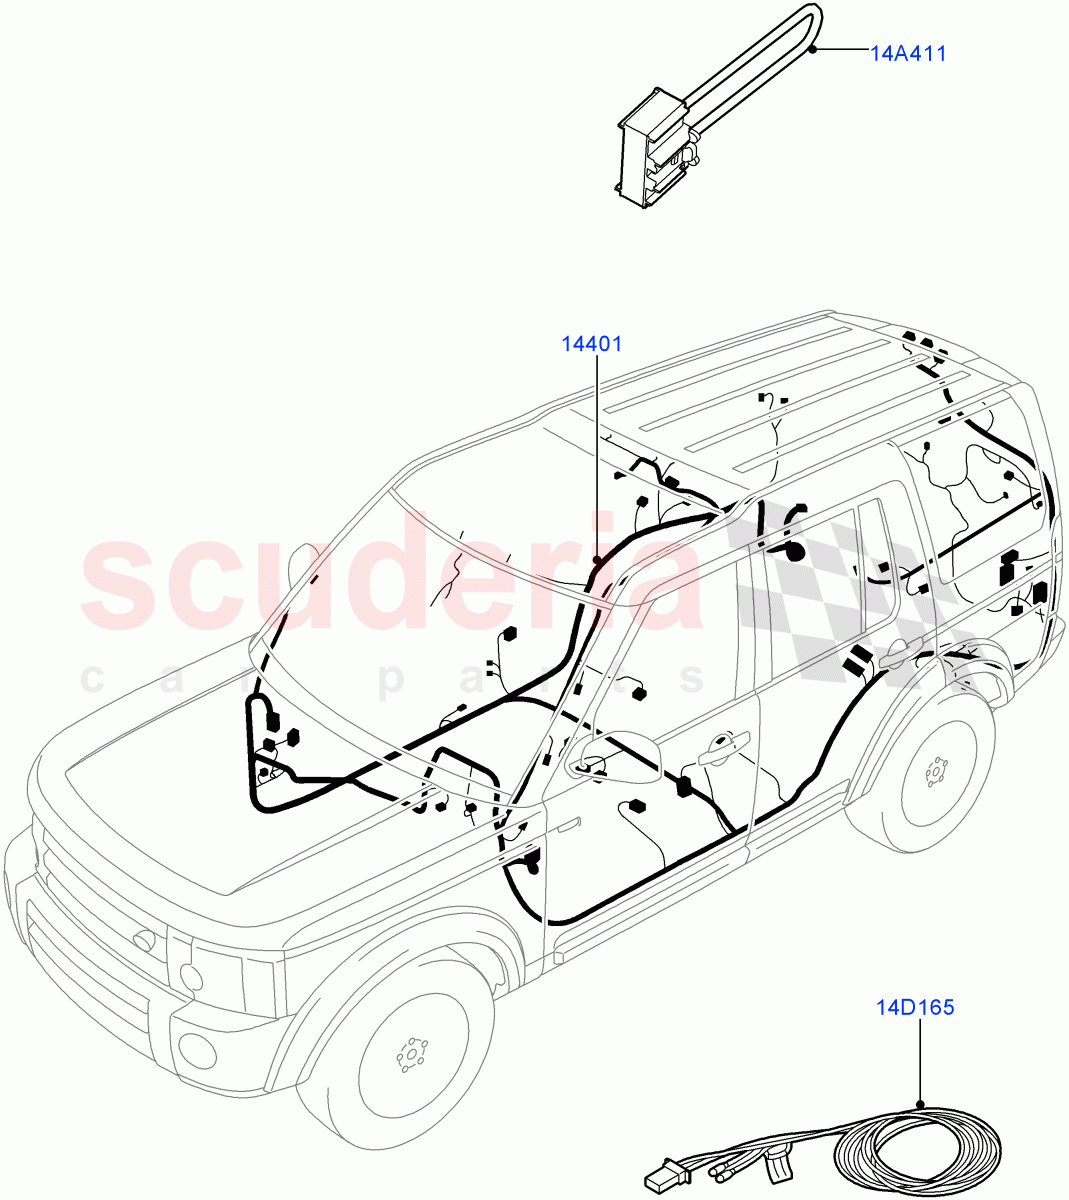 Electrical Wiring - Engine And Dash(Main Harness)((V)FROMBA000001,(V)TOBA999999) of Land Rover Land Rover Discovery 4 (2010-2016) [3.0 DOHC GDI SC V6 Petrol]